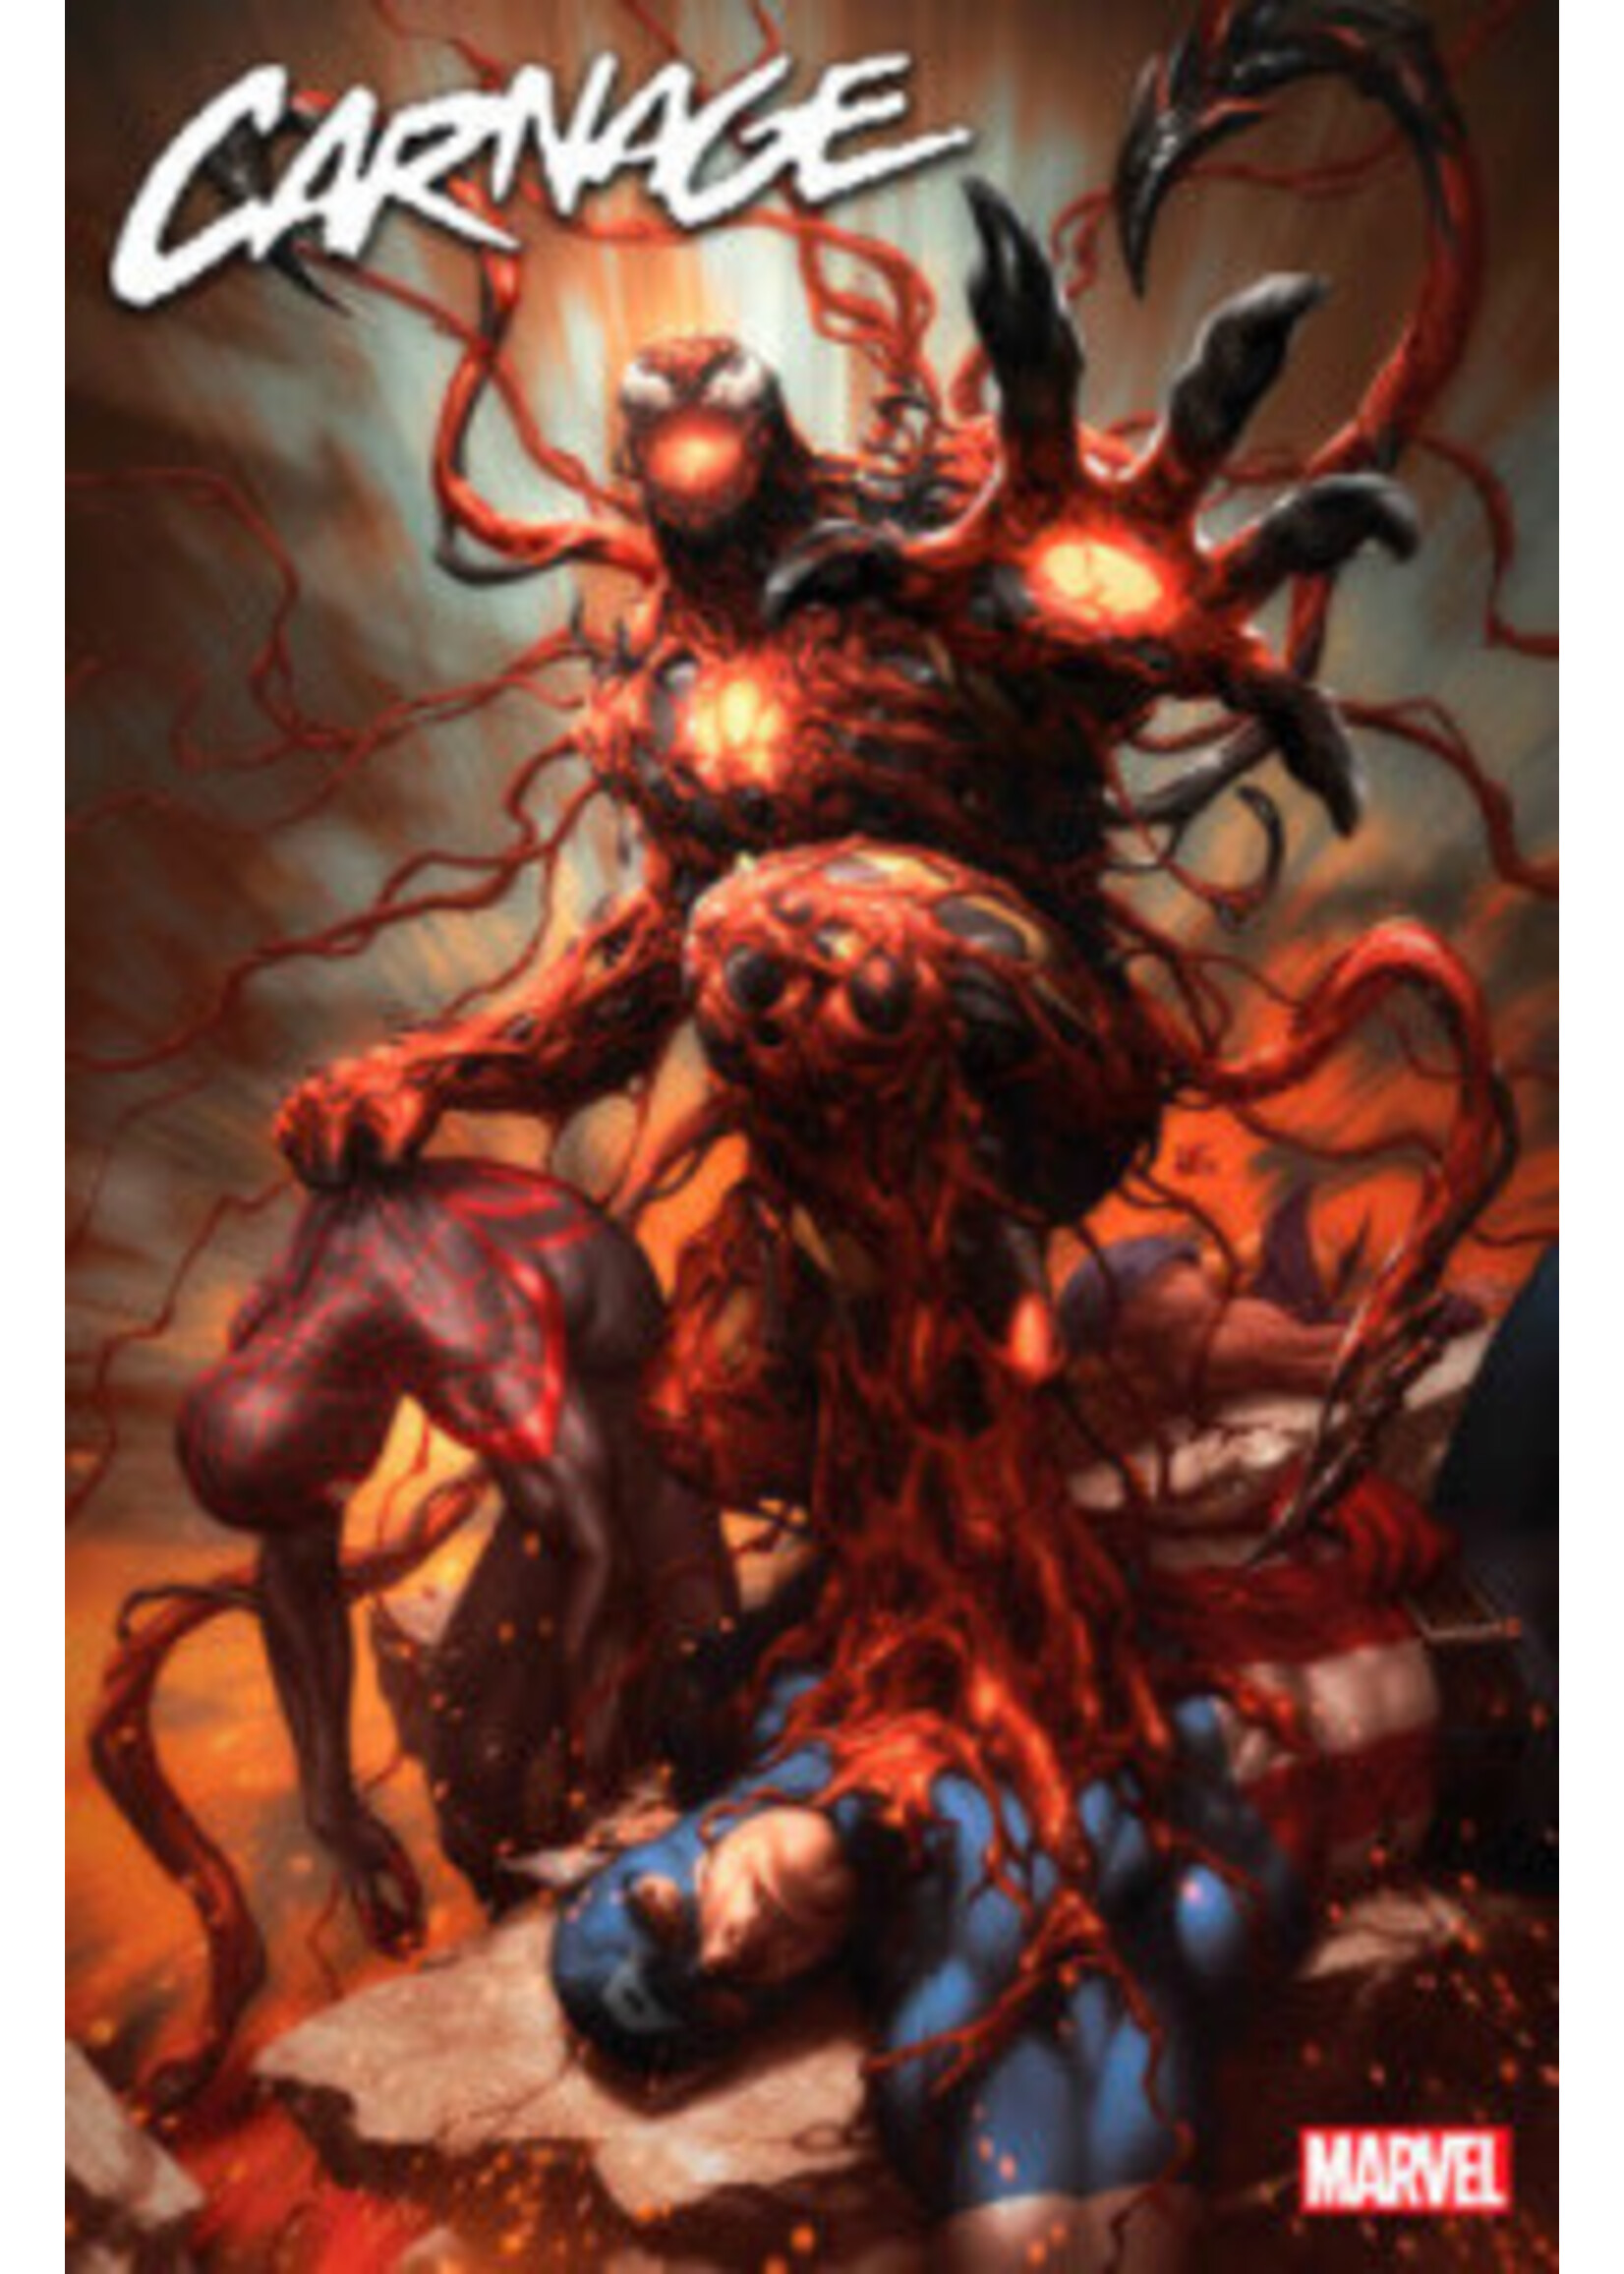 MARVEL COMICS CARNAGE (2022) complete 14 issue series